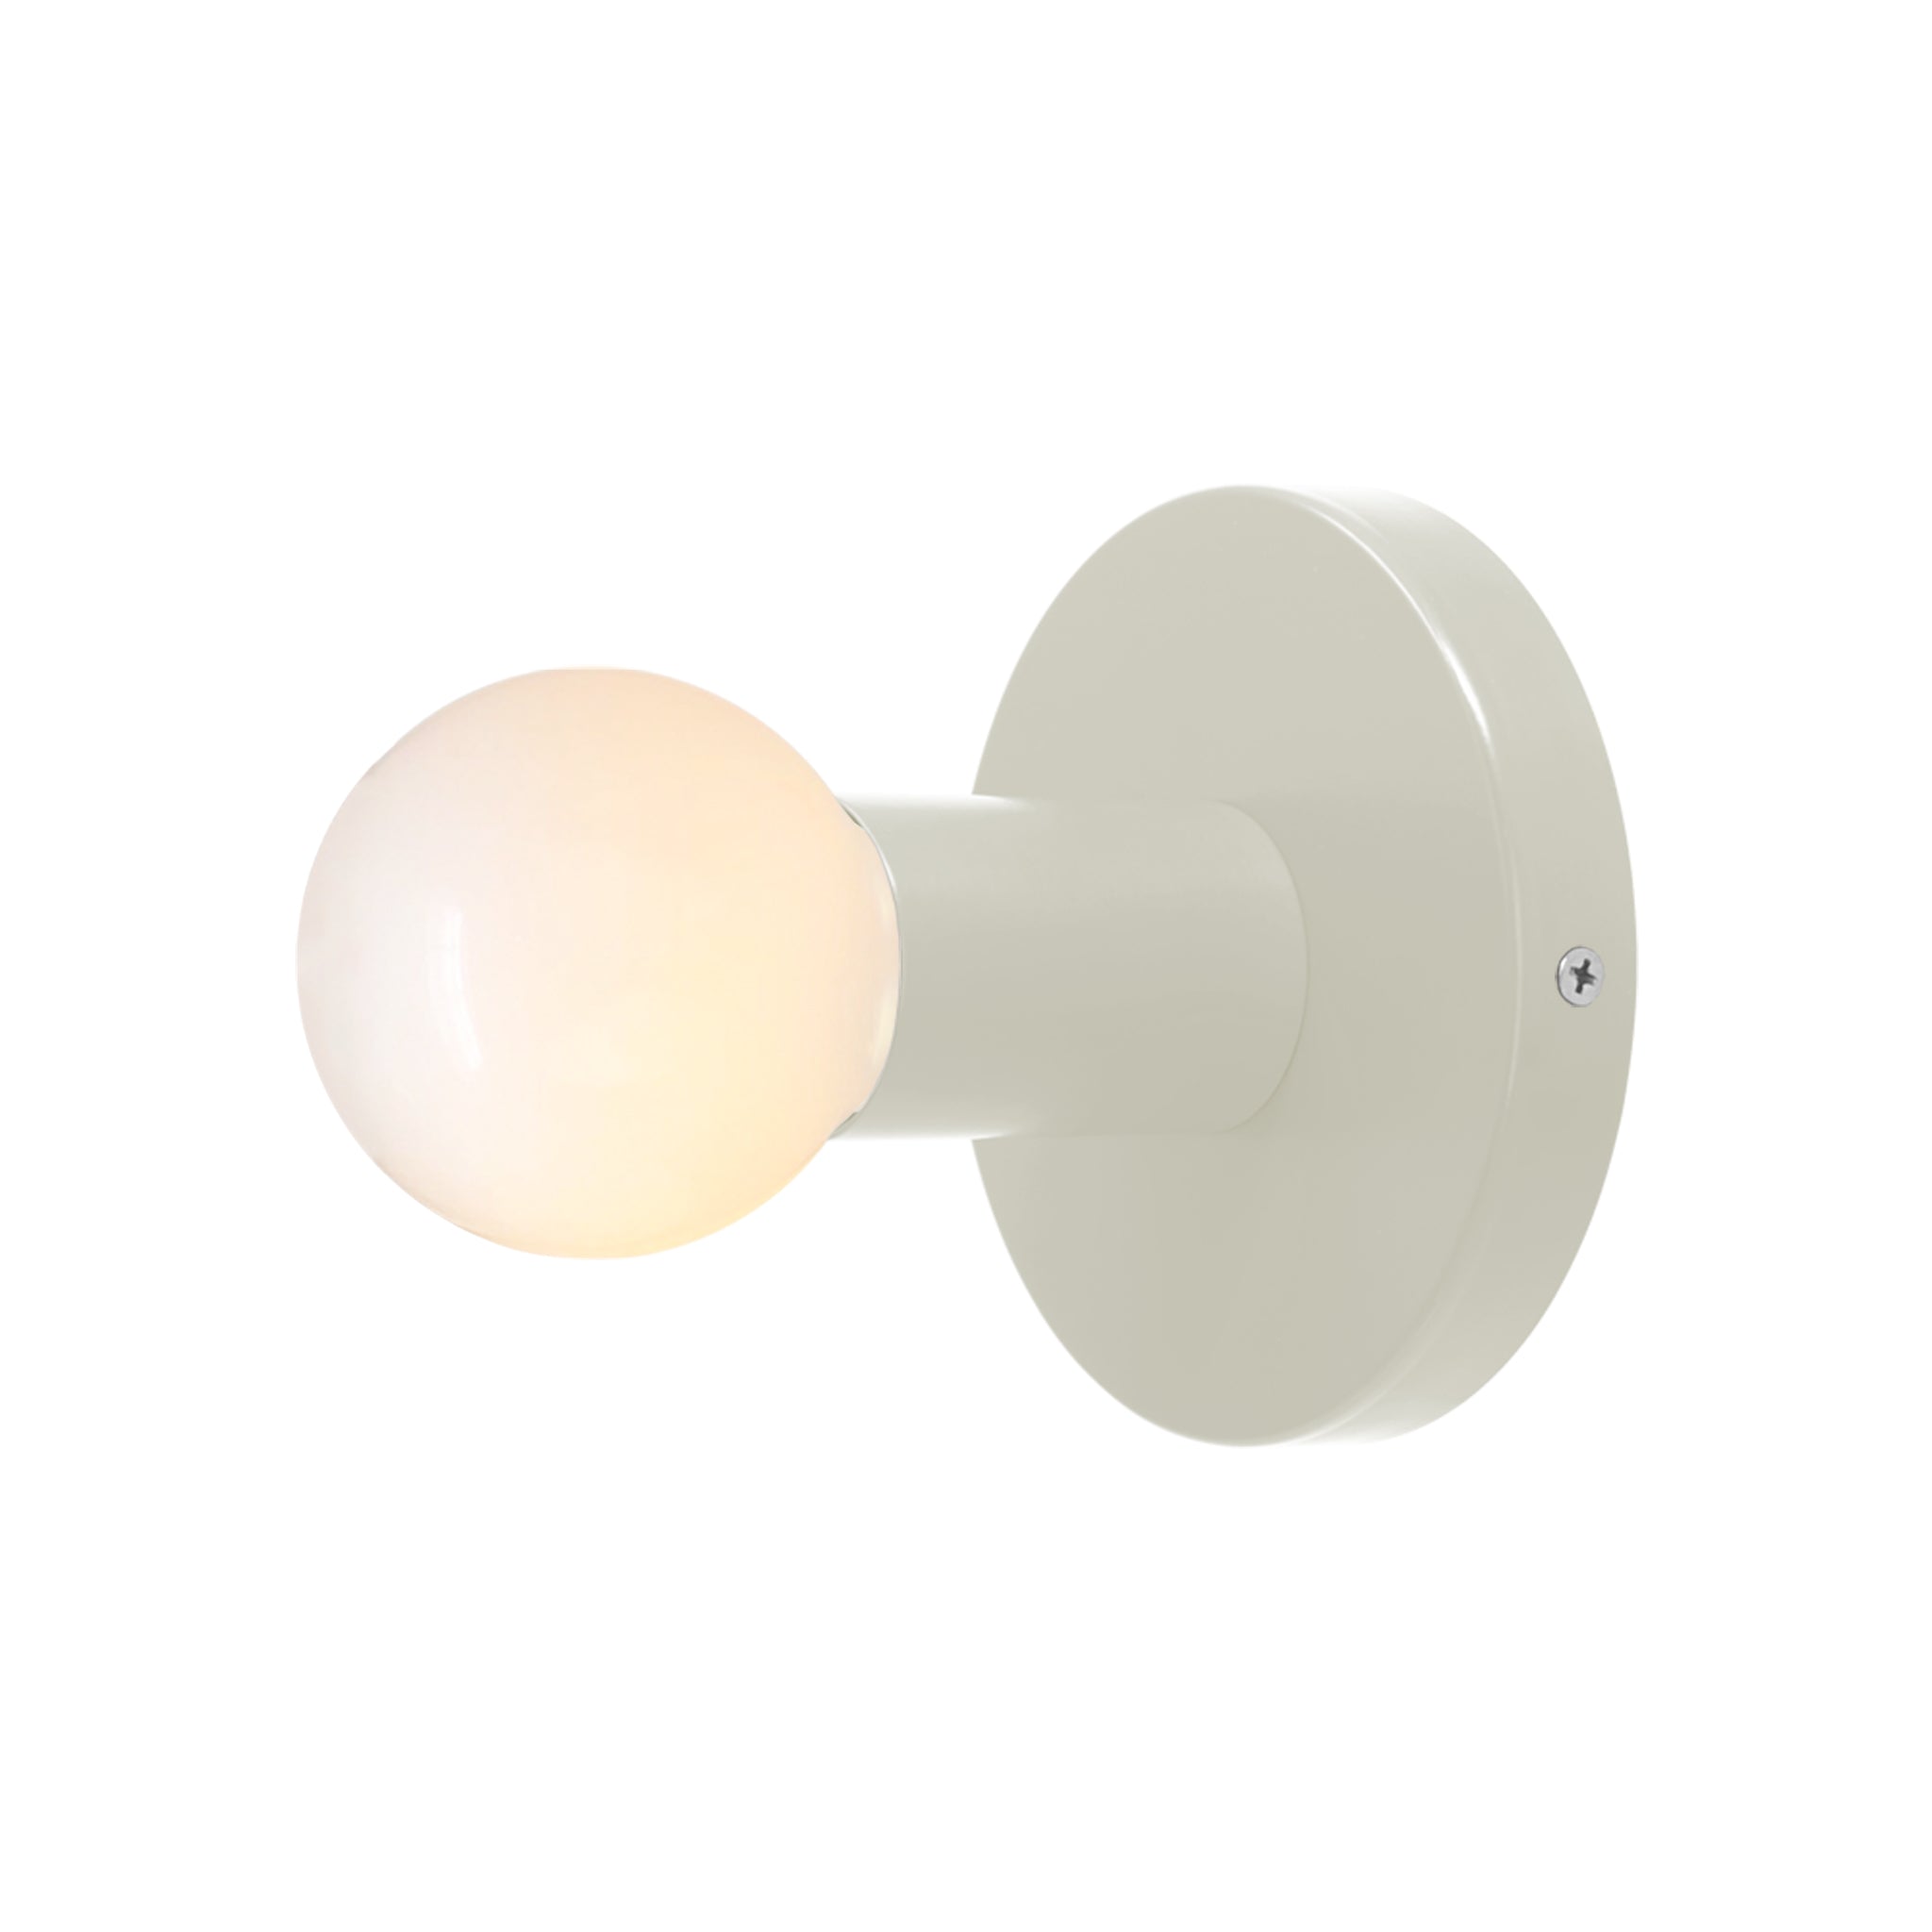 Nickel and bone color Twink sconce Dutton Brown lighting